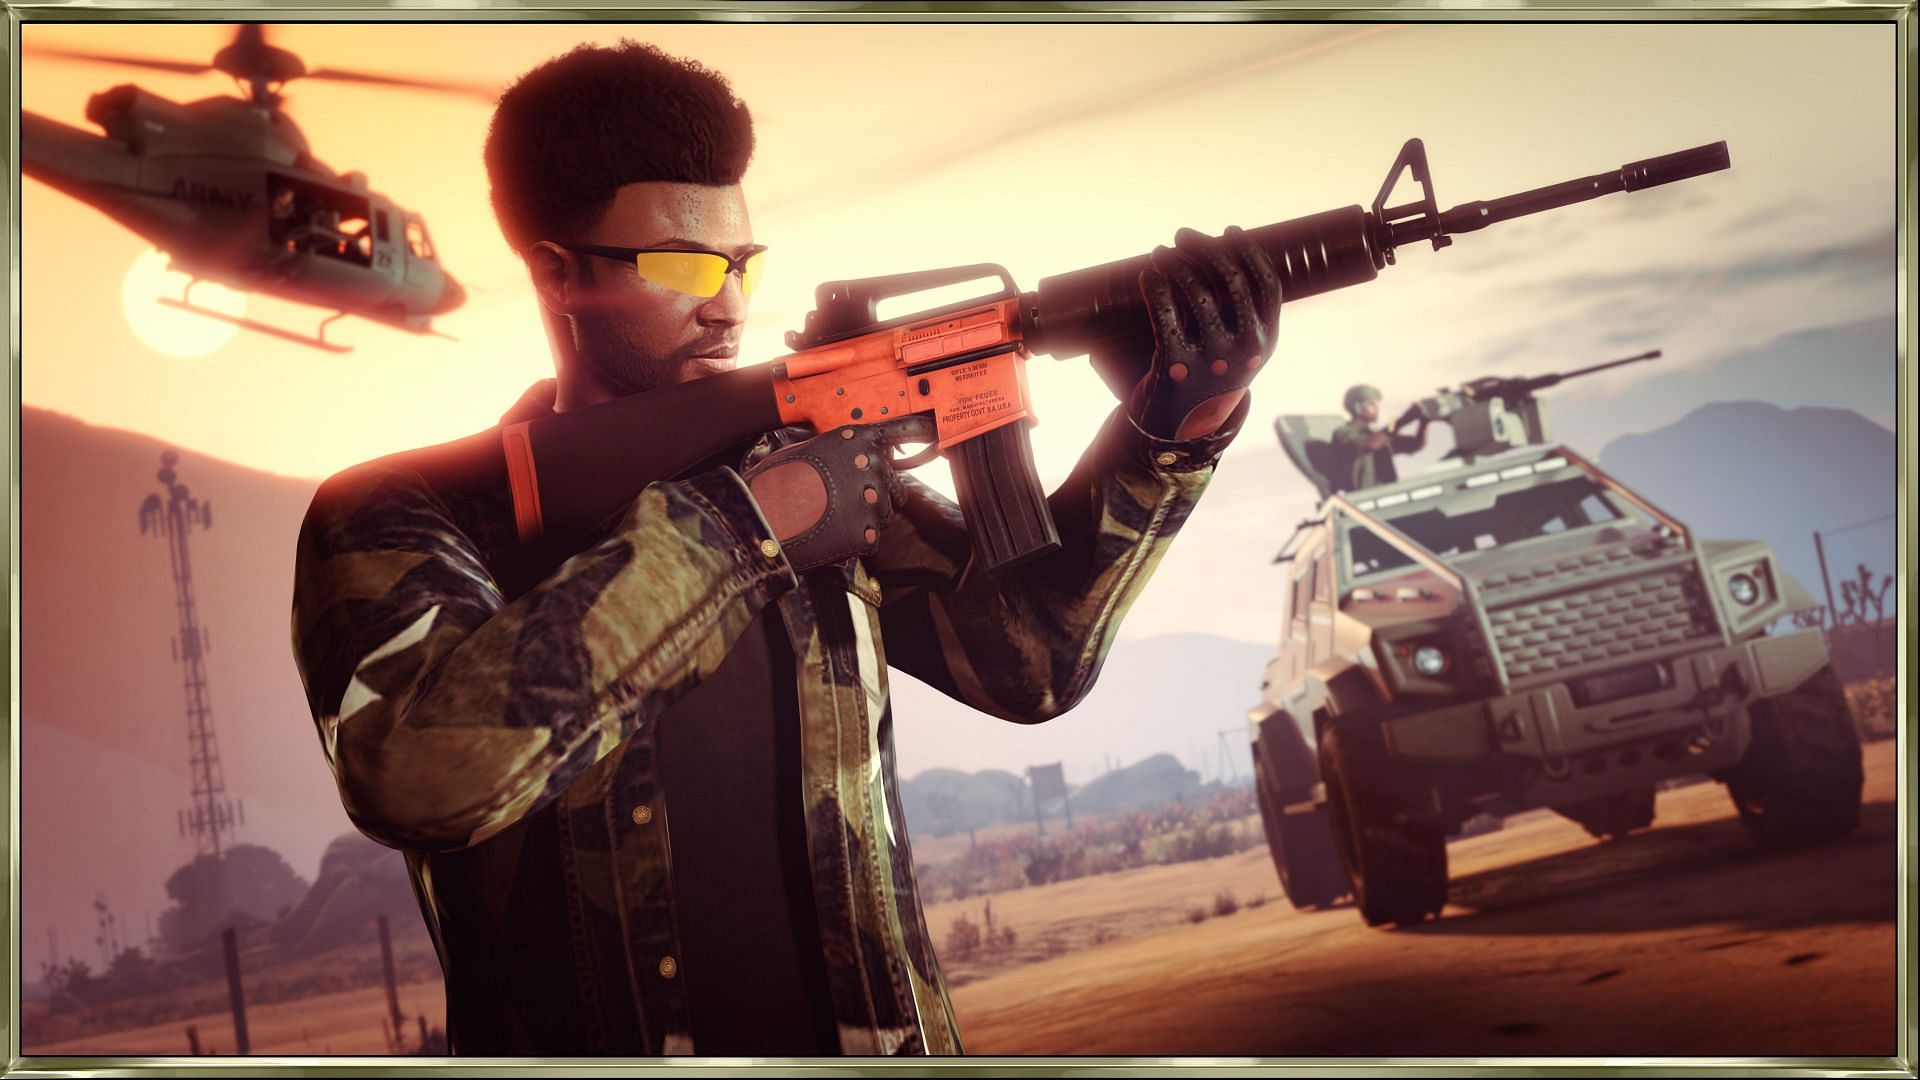 Another promotional image associated with this gun (Image via Rockstar Games)